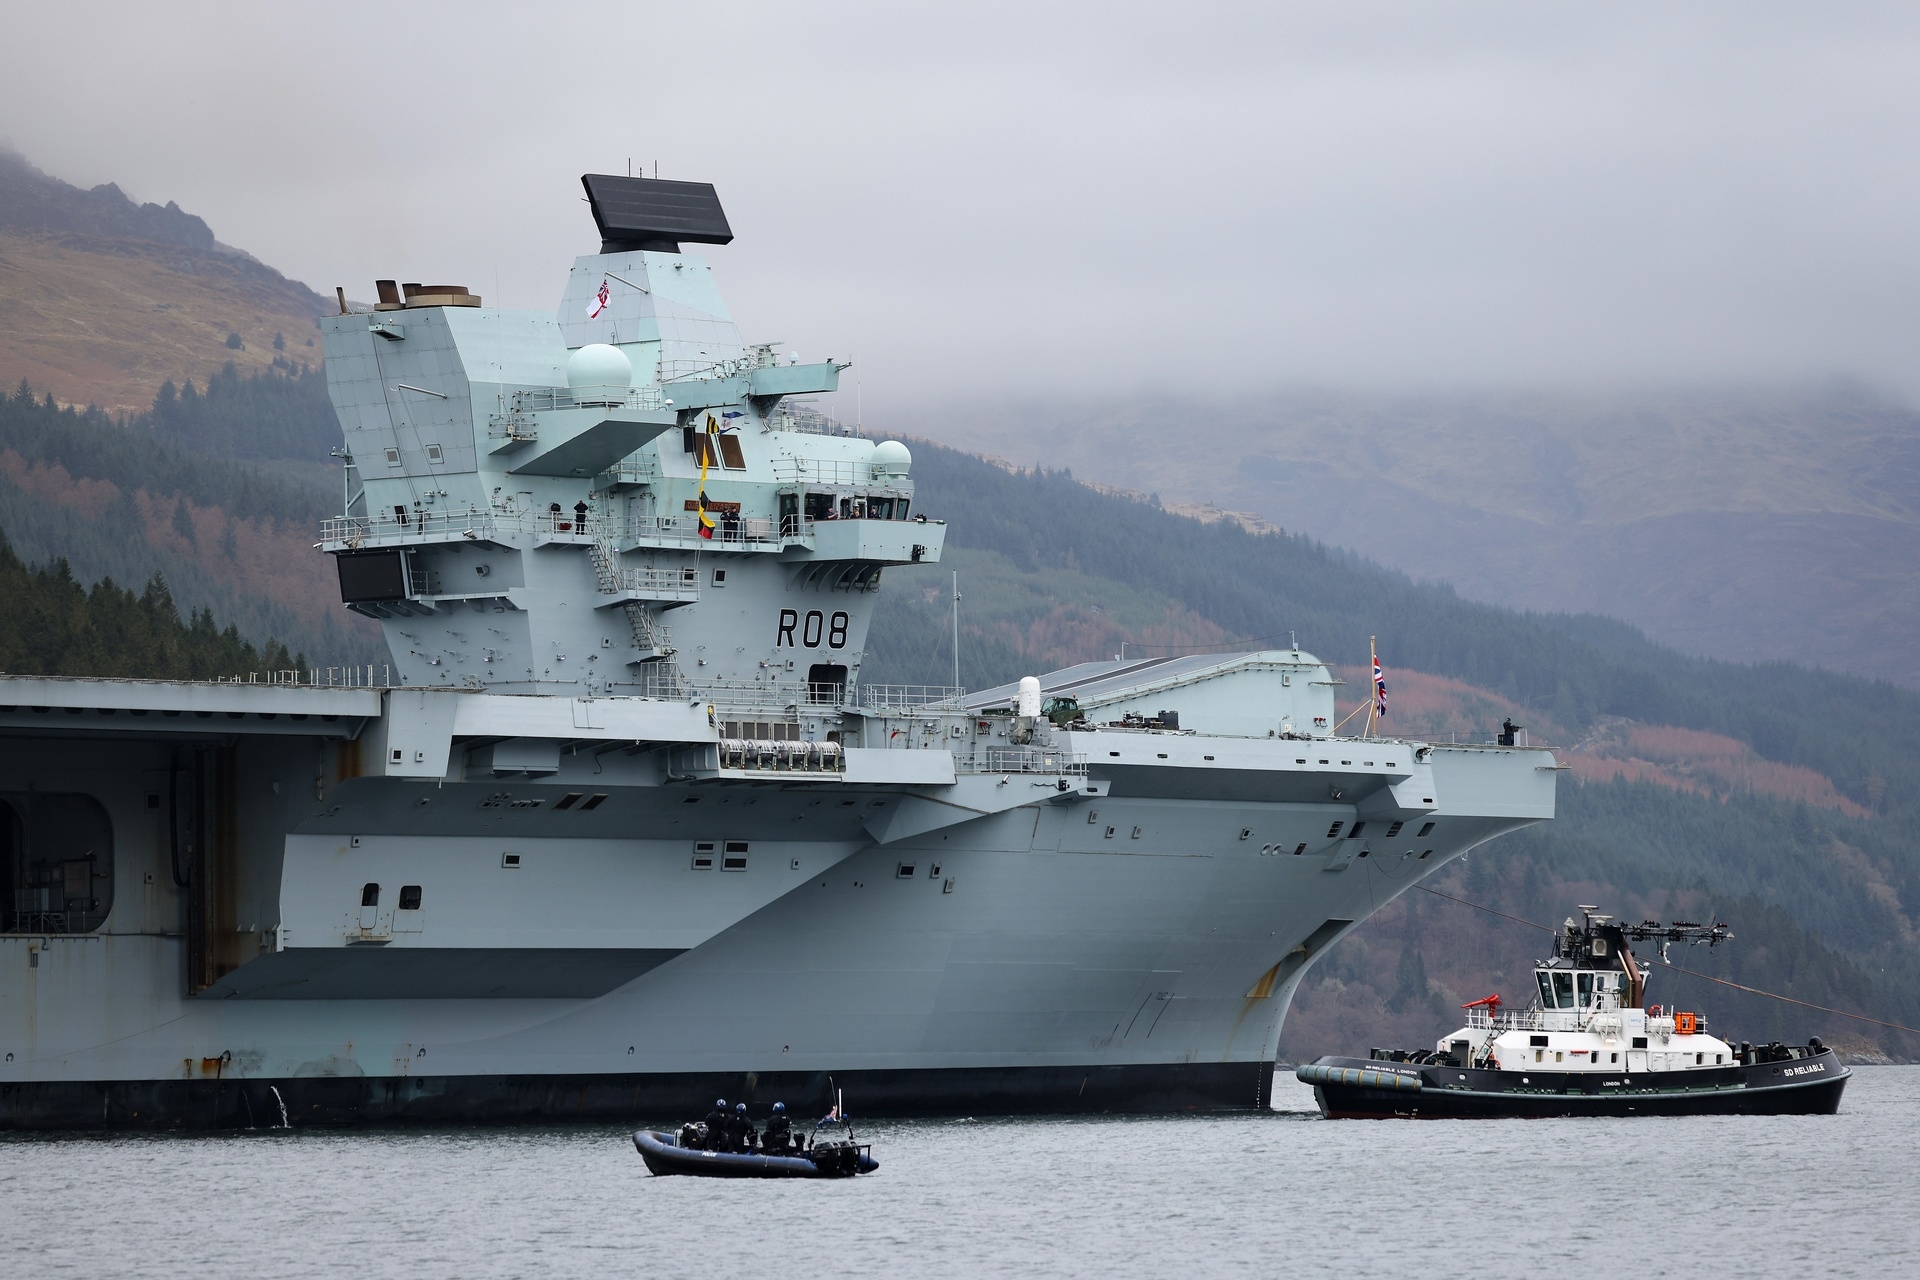 HMS Queen Elizabeth Royal Navy aircraft carrier visited Glen Mallan for the second time since her launch in July 2014.